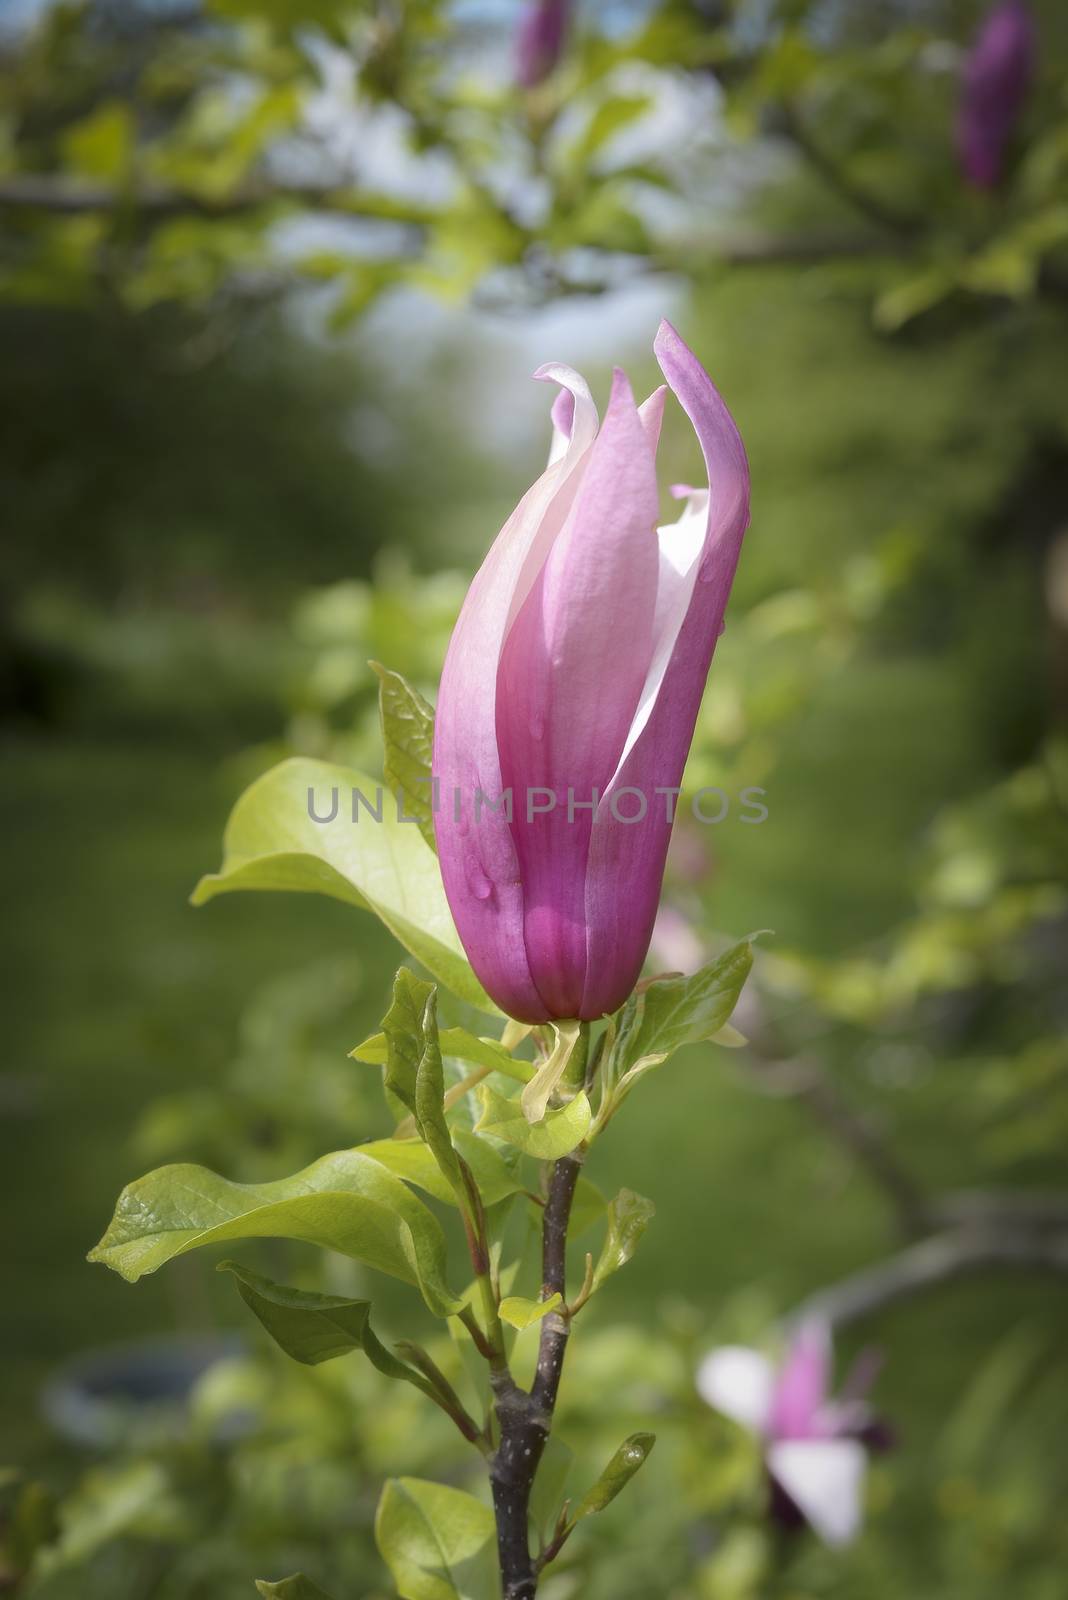 Single magnolia blossom in the morning light, greenery in background